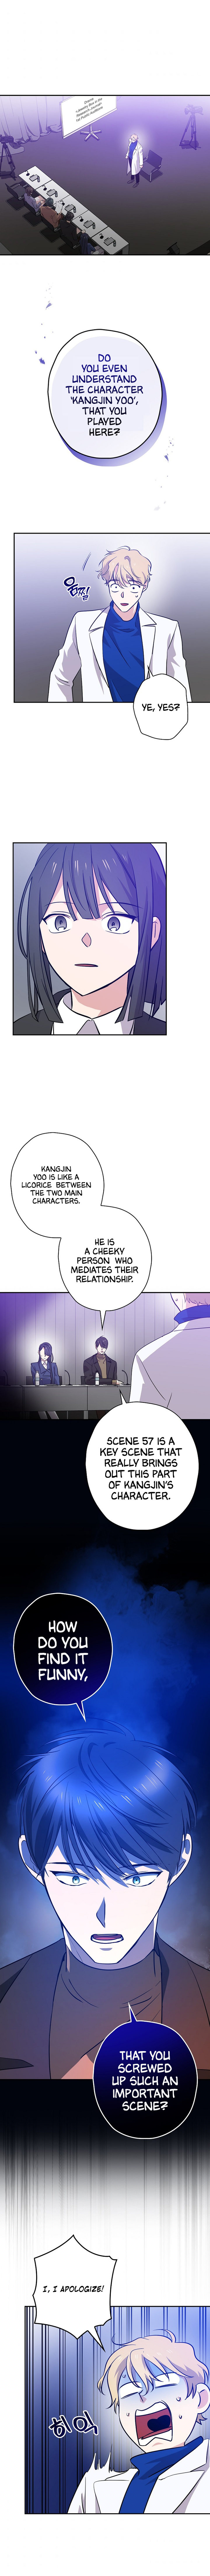 King of Drama Chapter 46 - Page 3